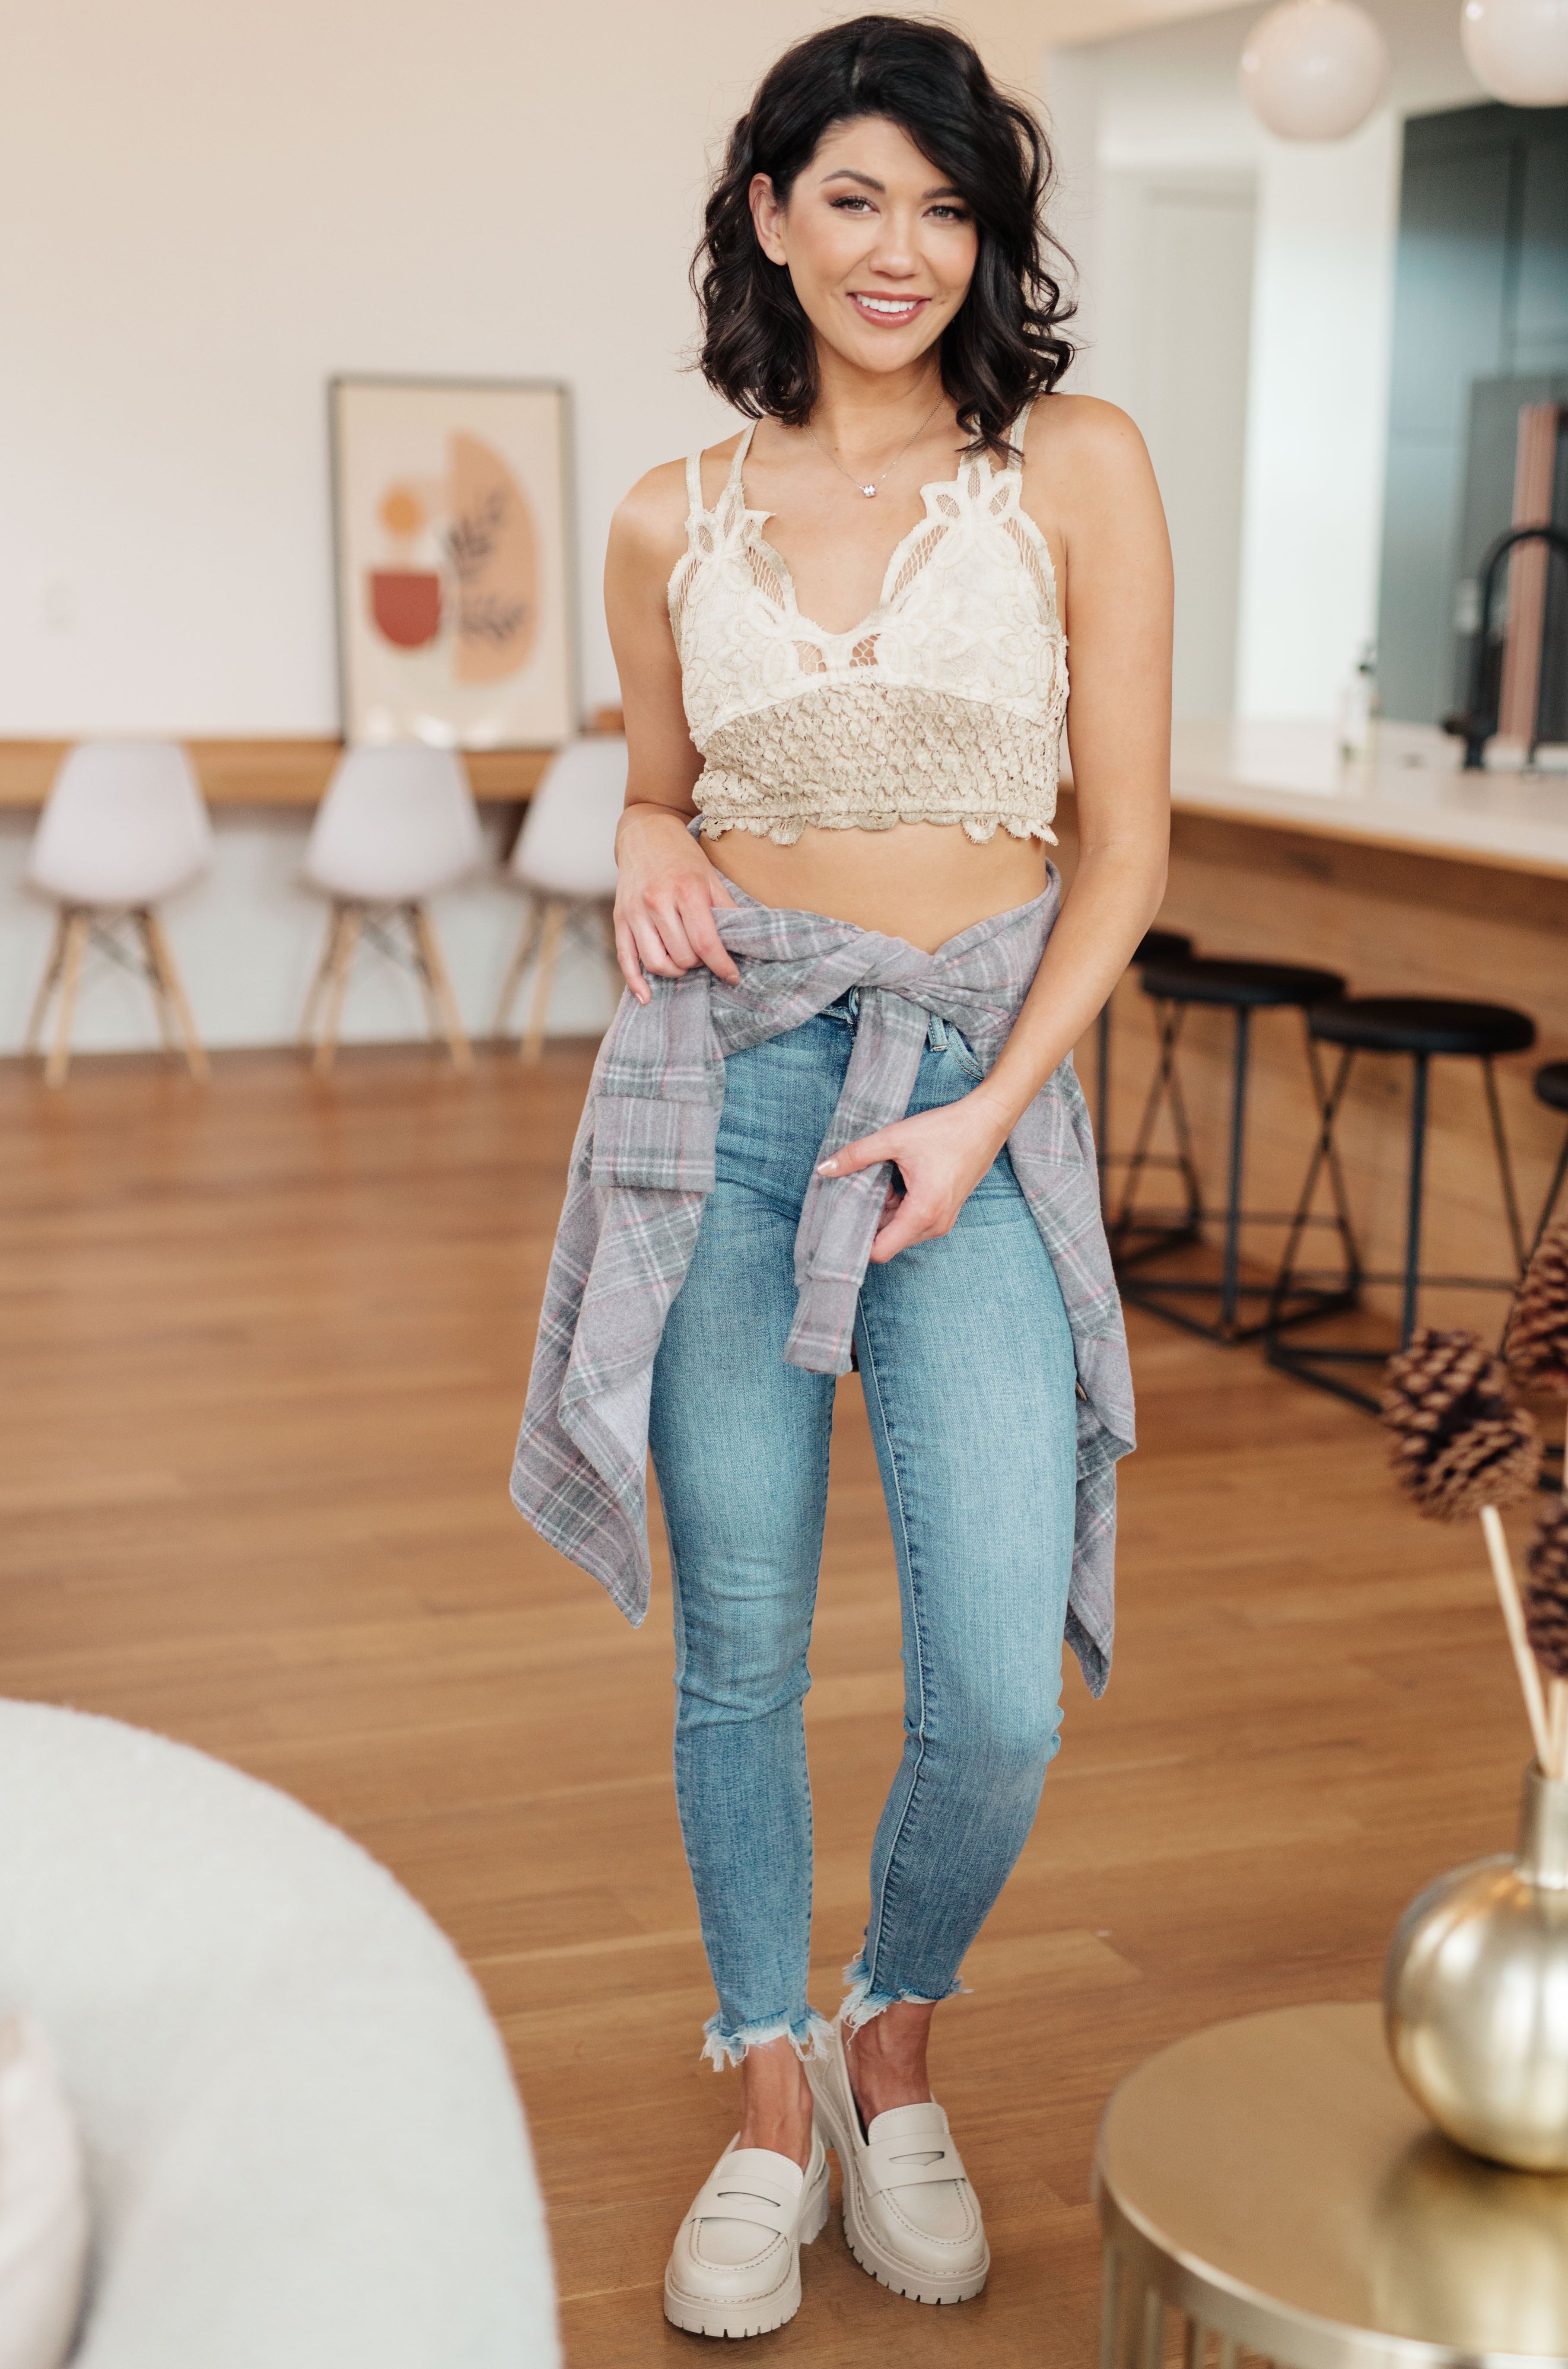 Ave Shops Live In Lace Bralette in Taupe Ave Shops